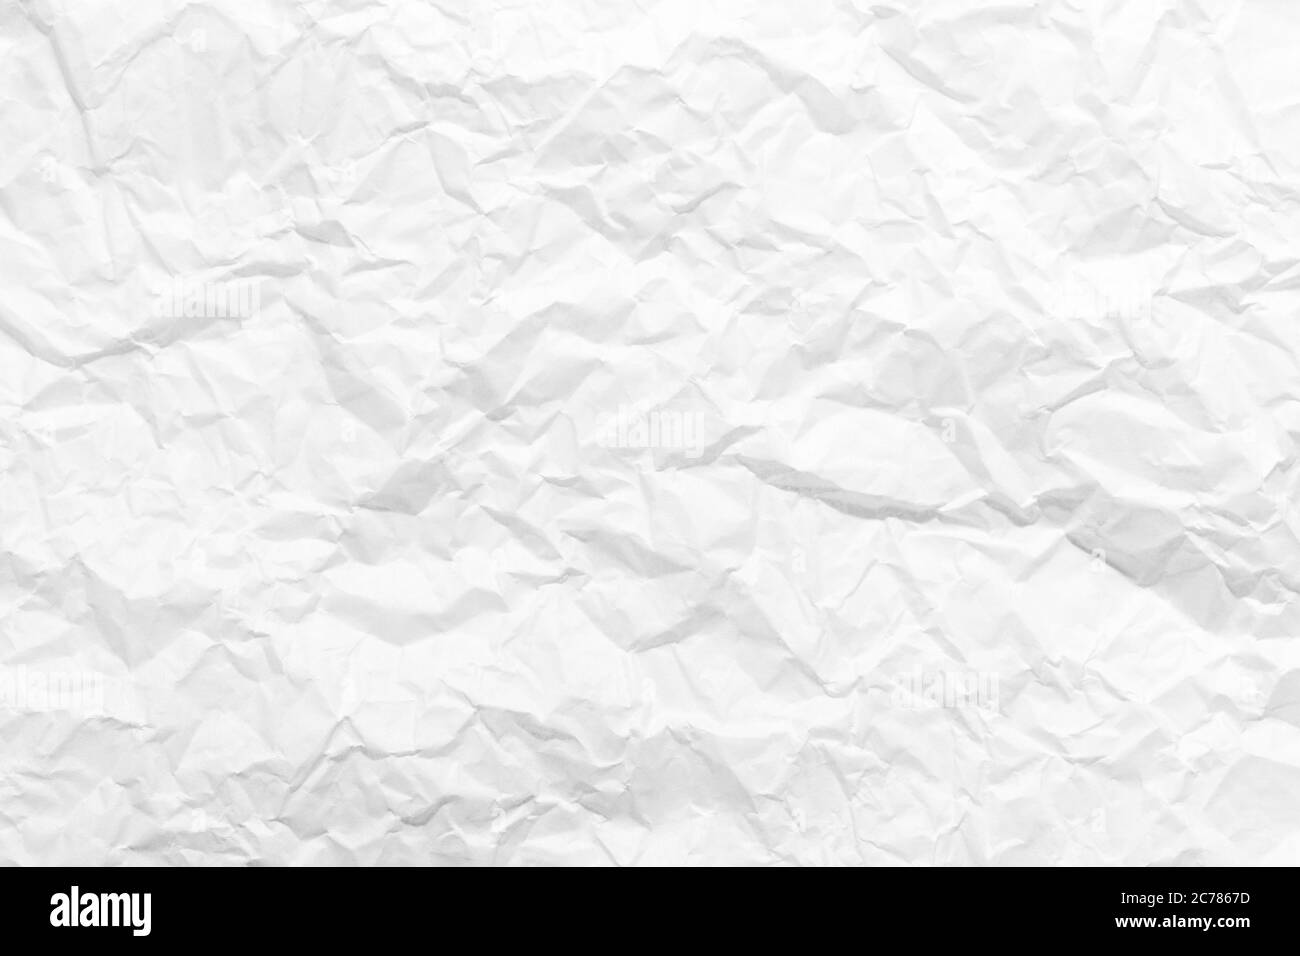 https://c8.alamy.com/comp/2C7867D/texture-of-crumpled-white-parchment-or-paper-abstract-background-for-design-blank-with-copy-space-for-a-text-2C7867D.jpg